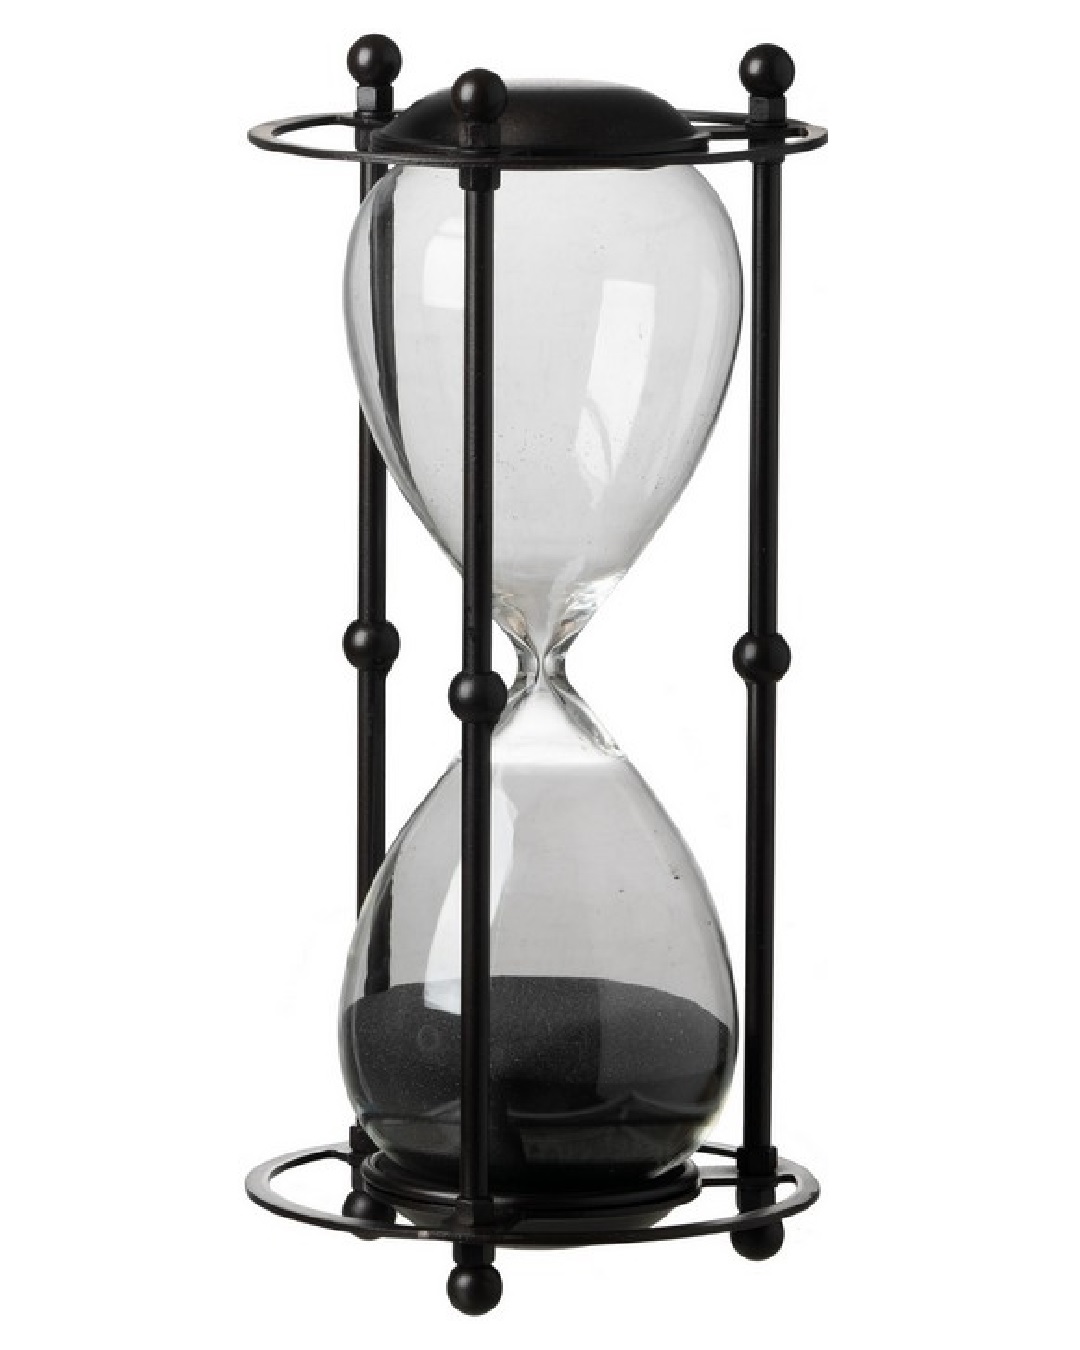 Hourglass in stand